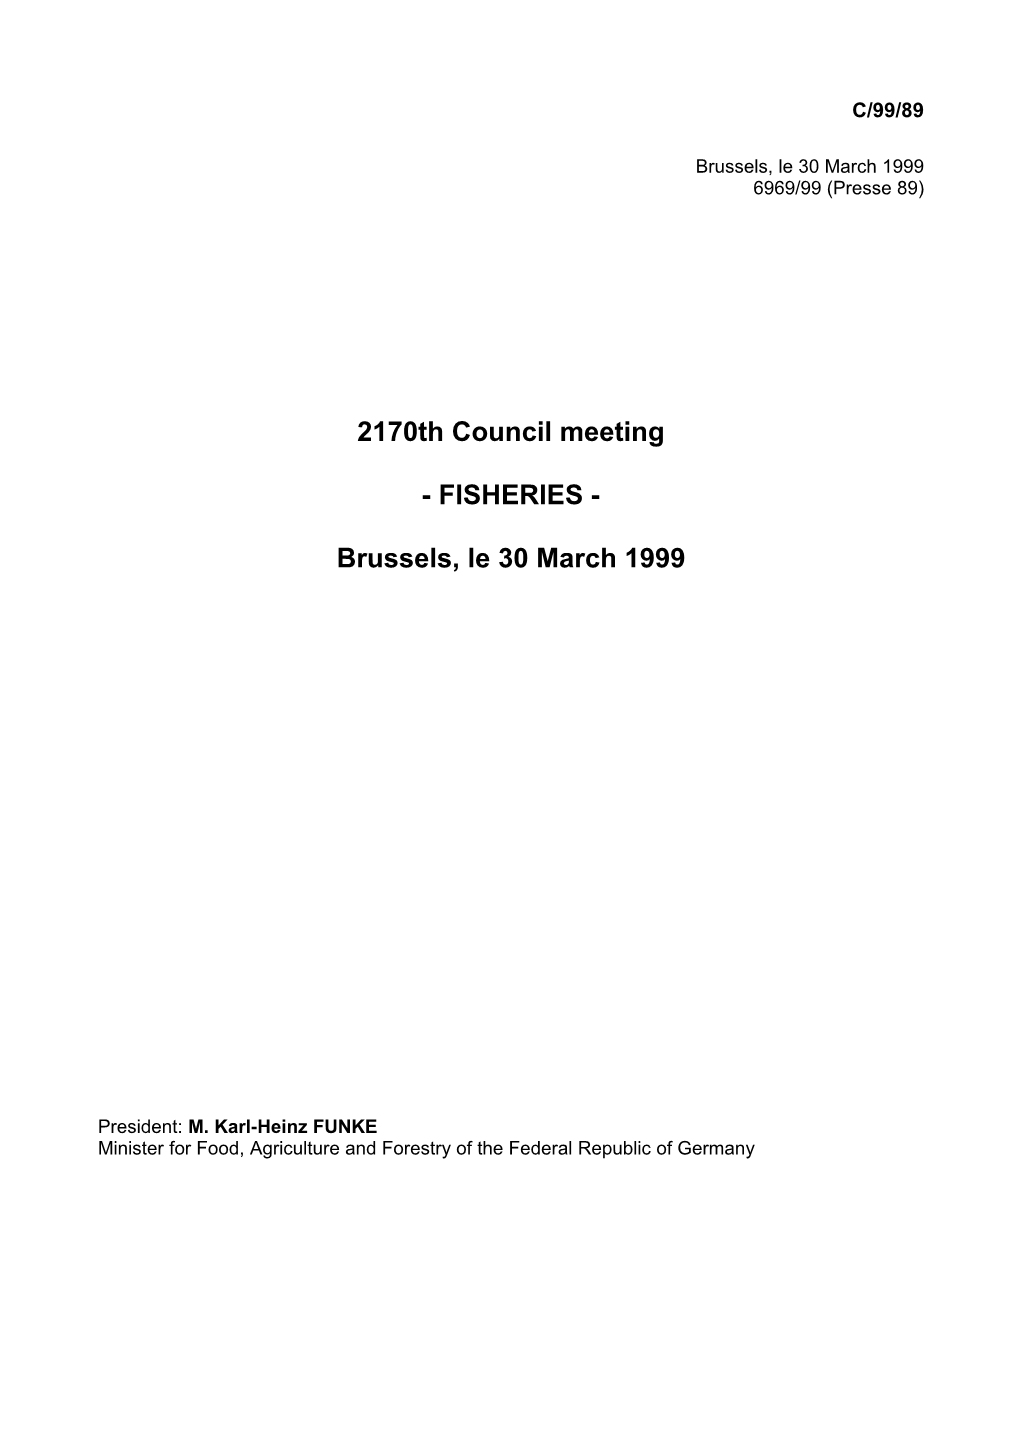 2170Th Council Meeting